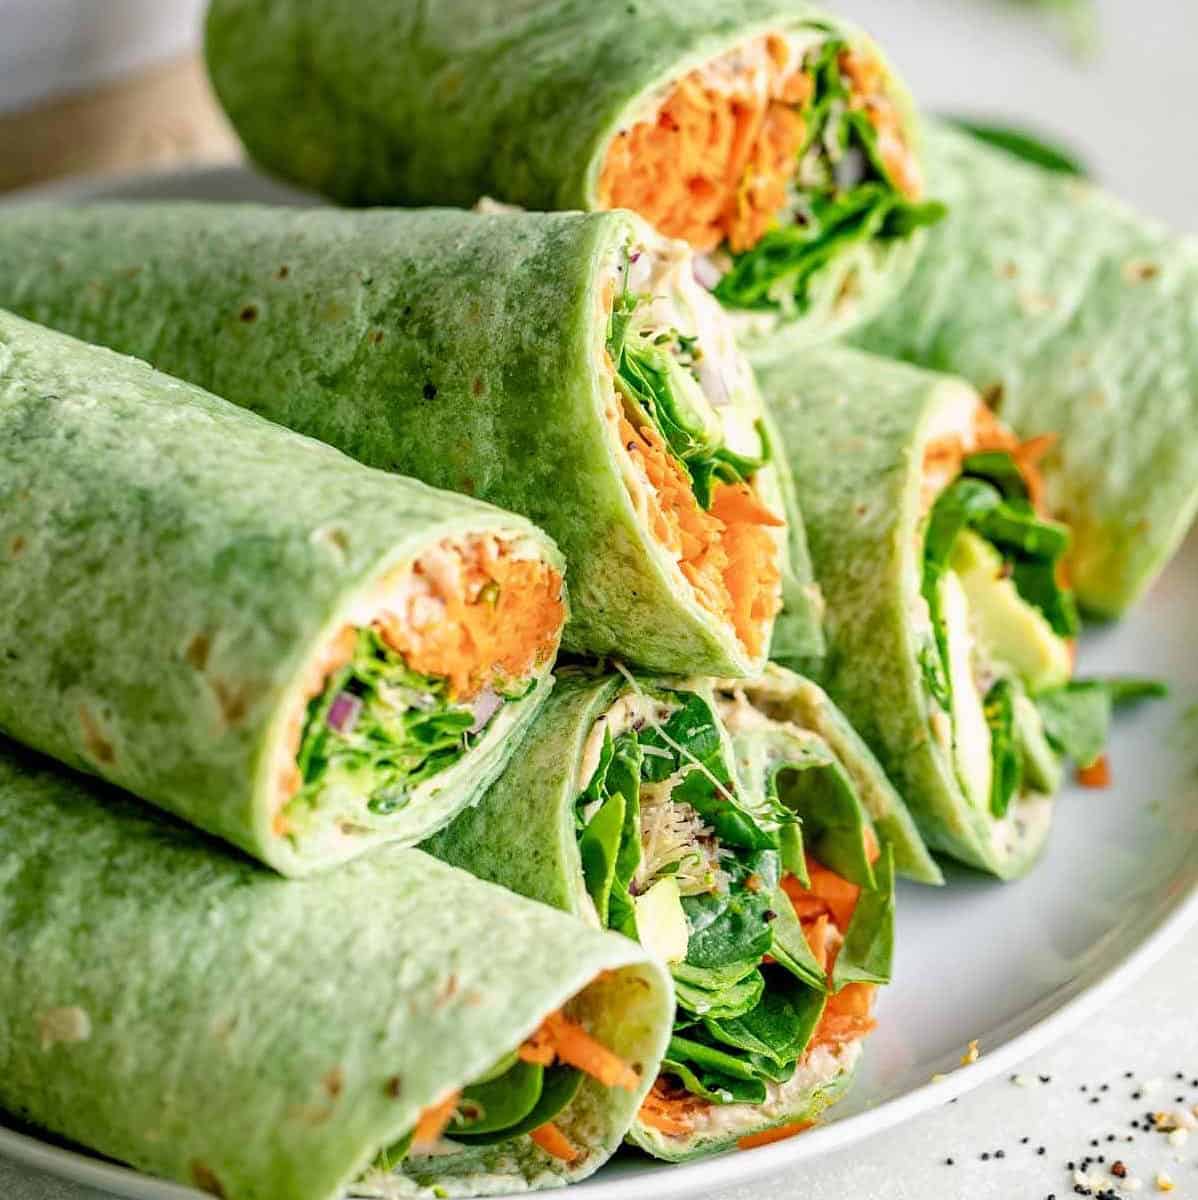  This spinach wrap is ready to be wrapped up like a present!